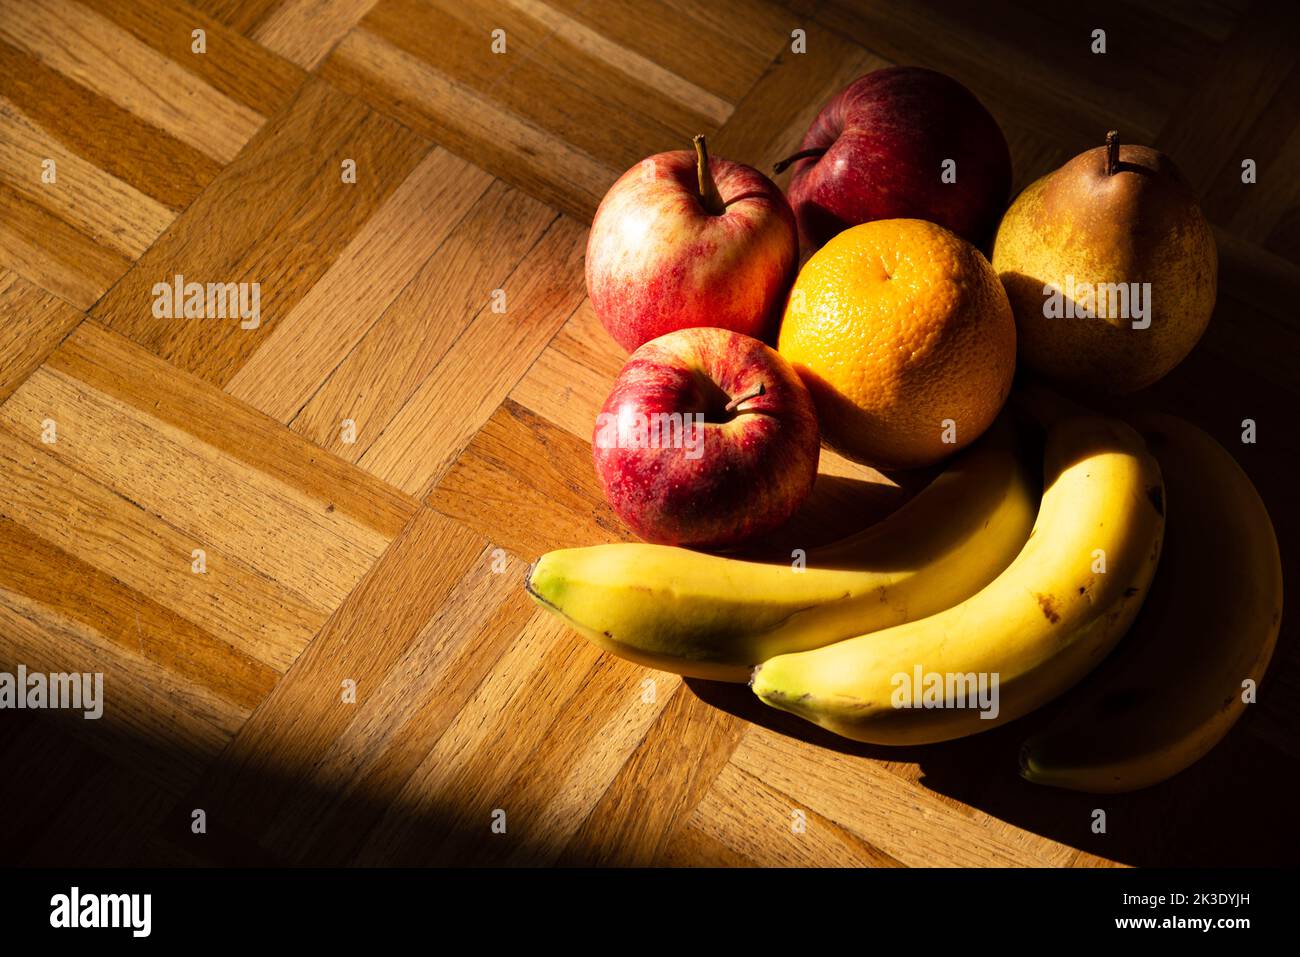 Still life with colorful organic apples, pear, orange banana ripe fruits on vintage wooden surface. Healthy eating background. Stock Photo